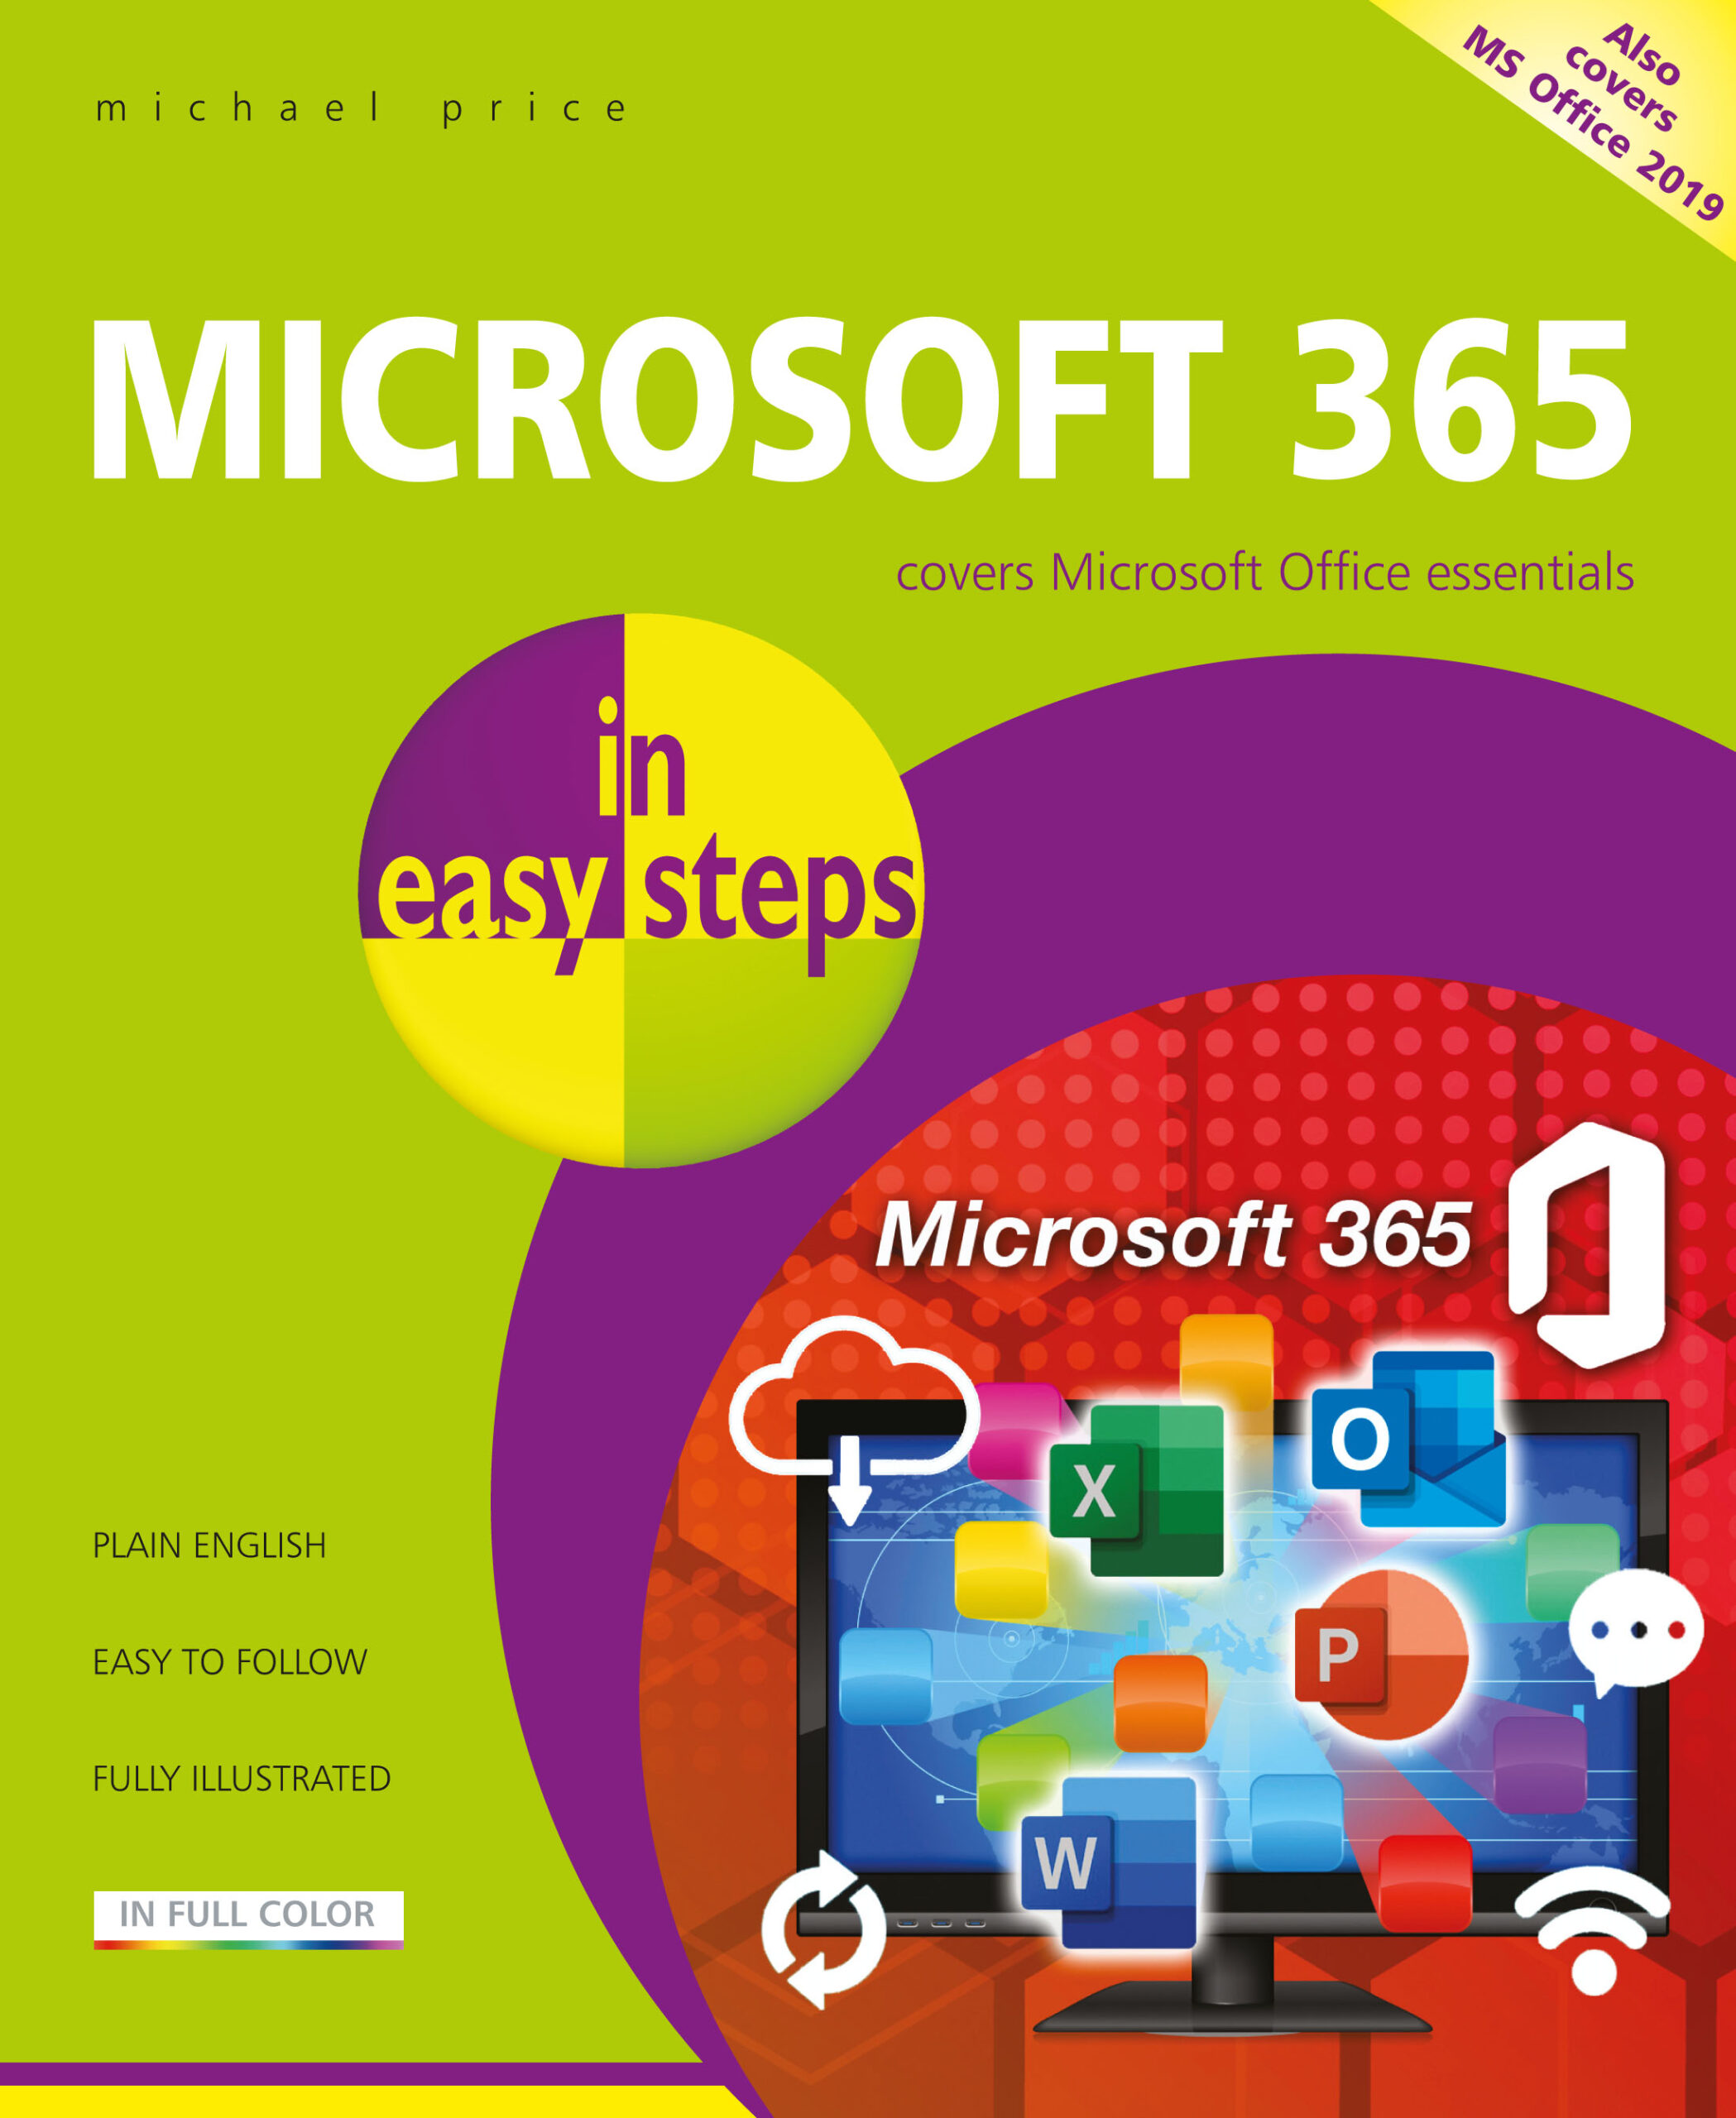 Microsoft 365 in easy steps - covers Microsoft 365 and Office 2019